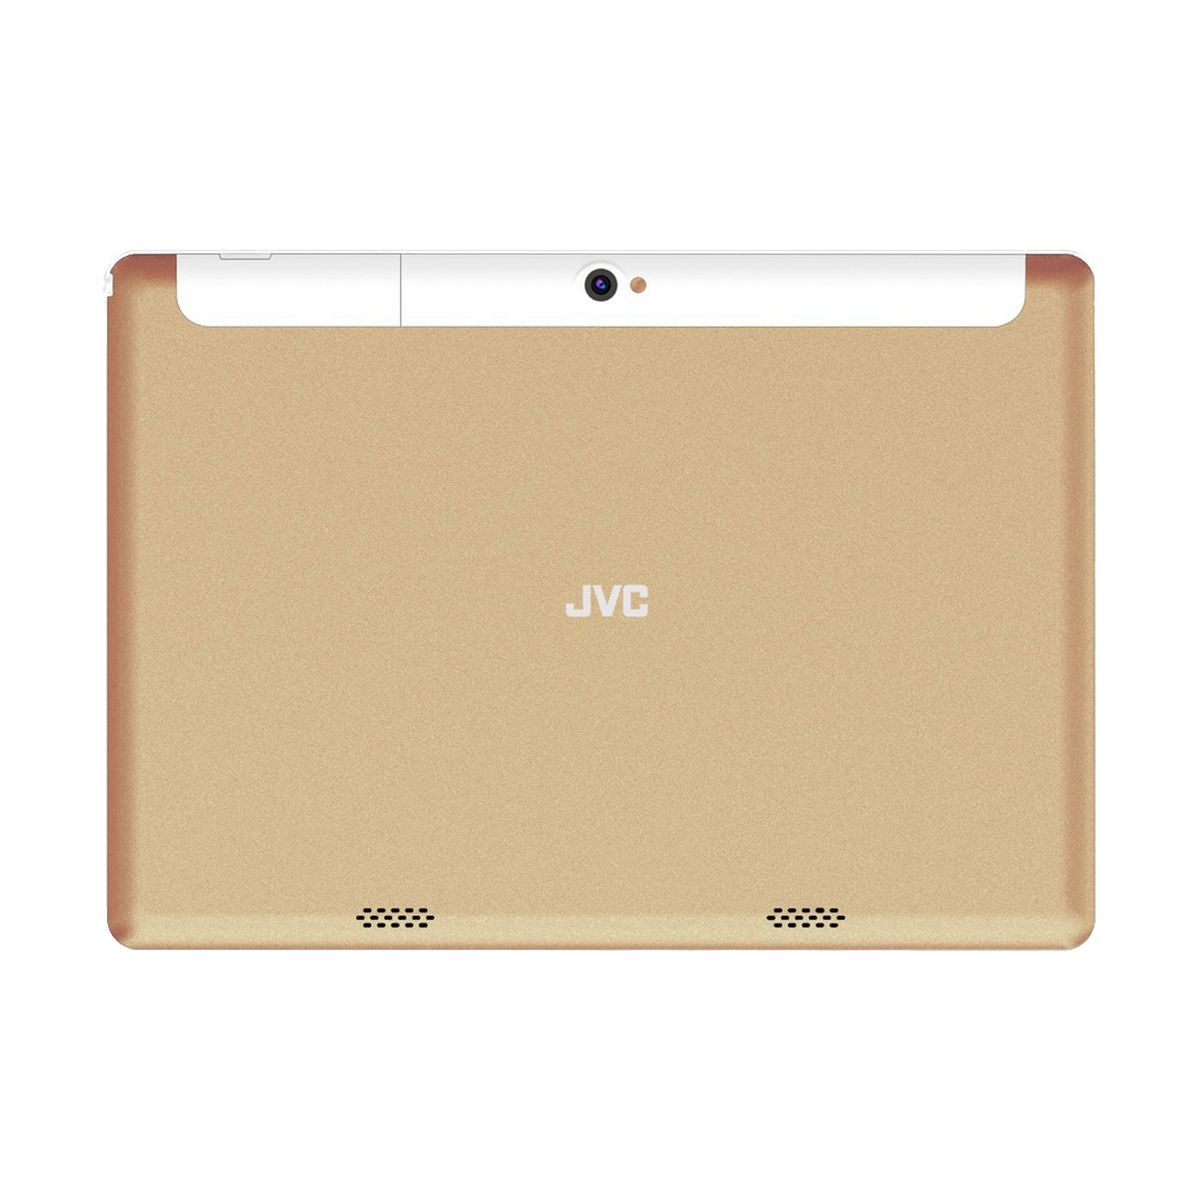 JVC 10.1" Android Powered 4G + WIFI Tablet - Gold 111304